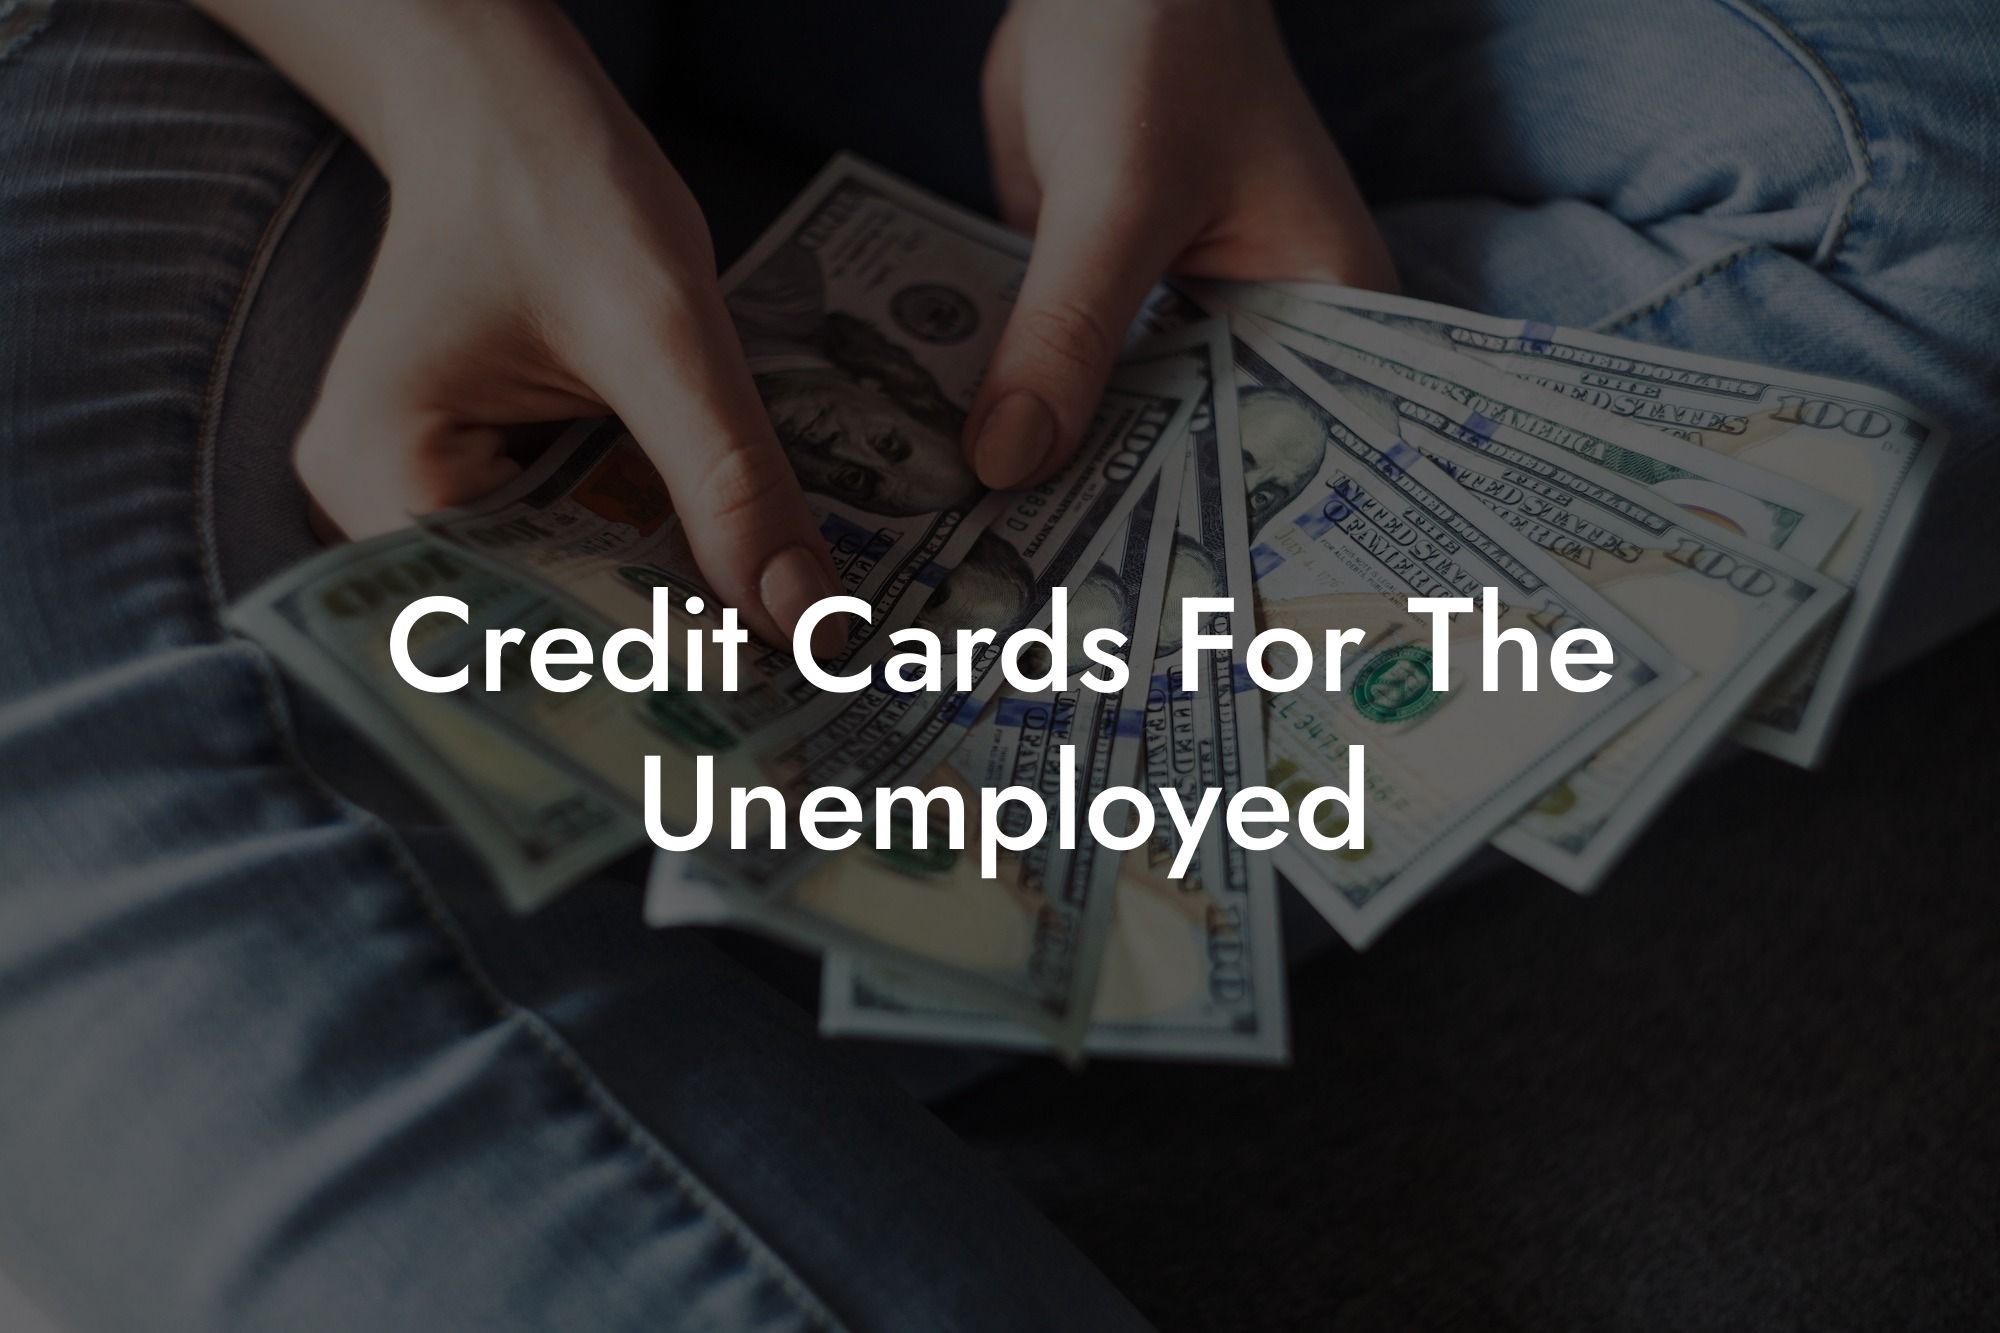 Credit Cards For The Unemployed